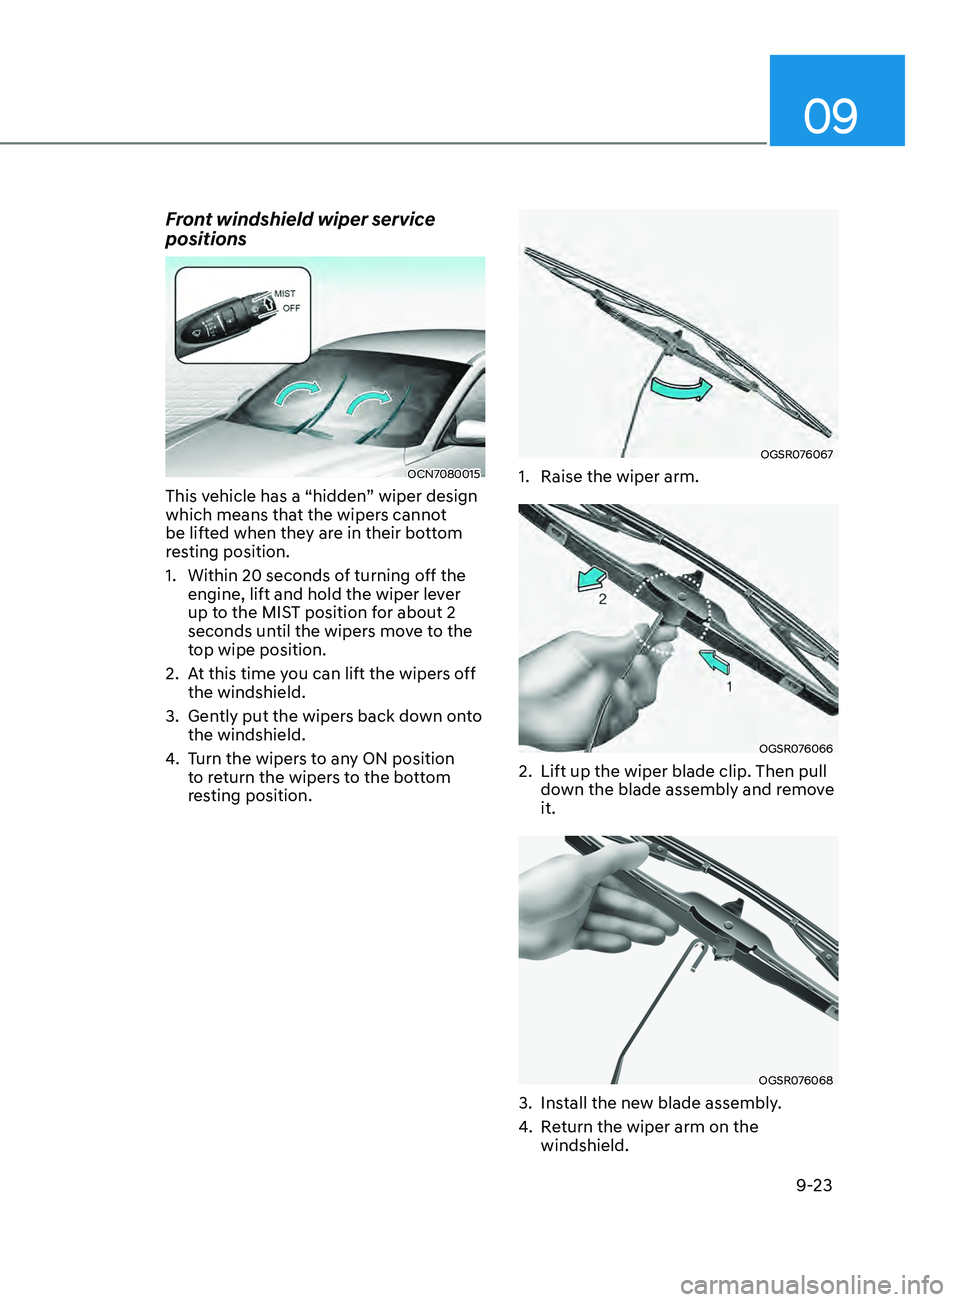 HYUNDAI ELANTRA SEL 2021  Owners Manual 09
9-23
Front windshield wiper service 
positions
OCN7080015
This vehicle has a “hidden” wiper design 
which means that the wipers cannot 
be lifted when they are in their bottom 
resting position